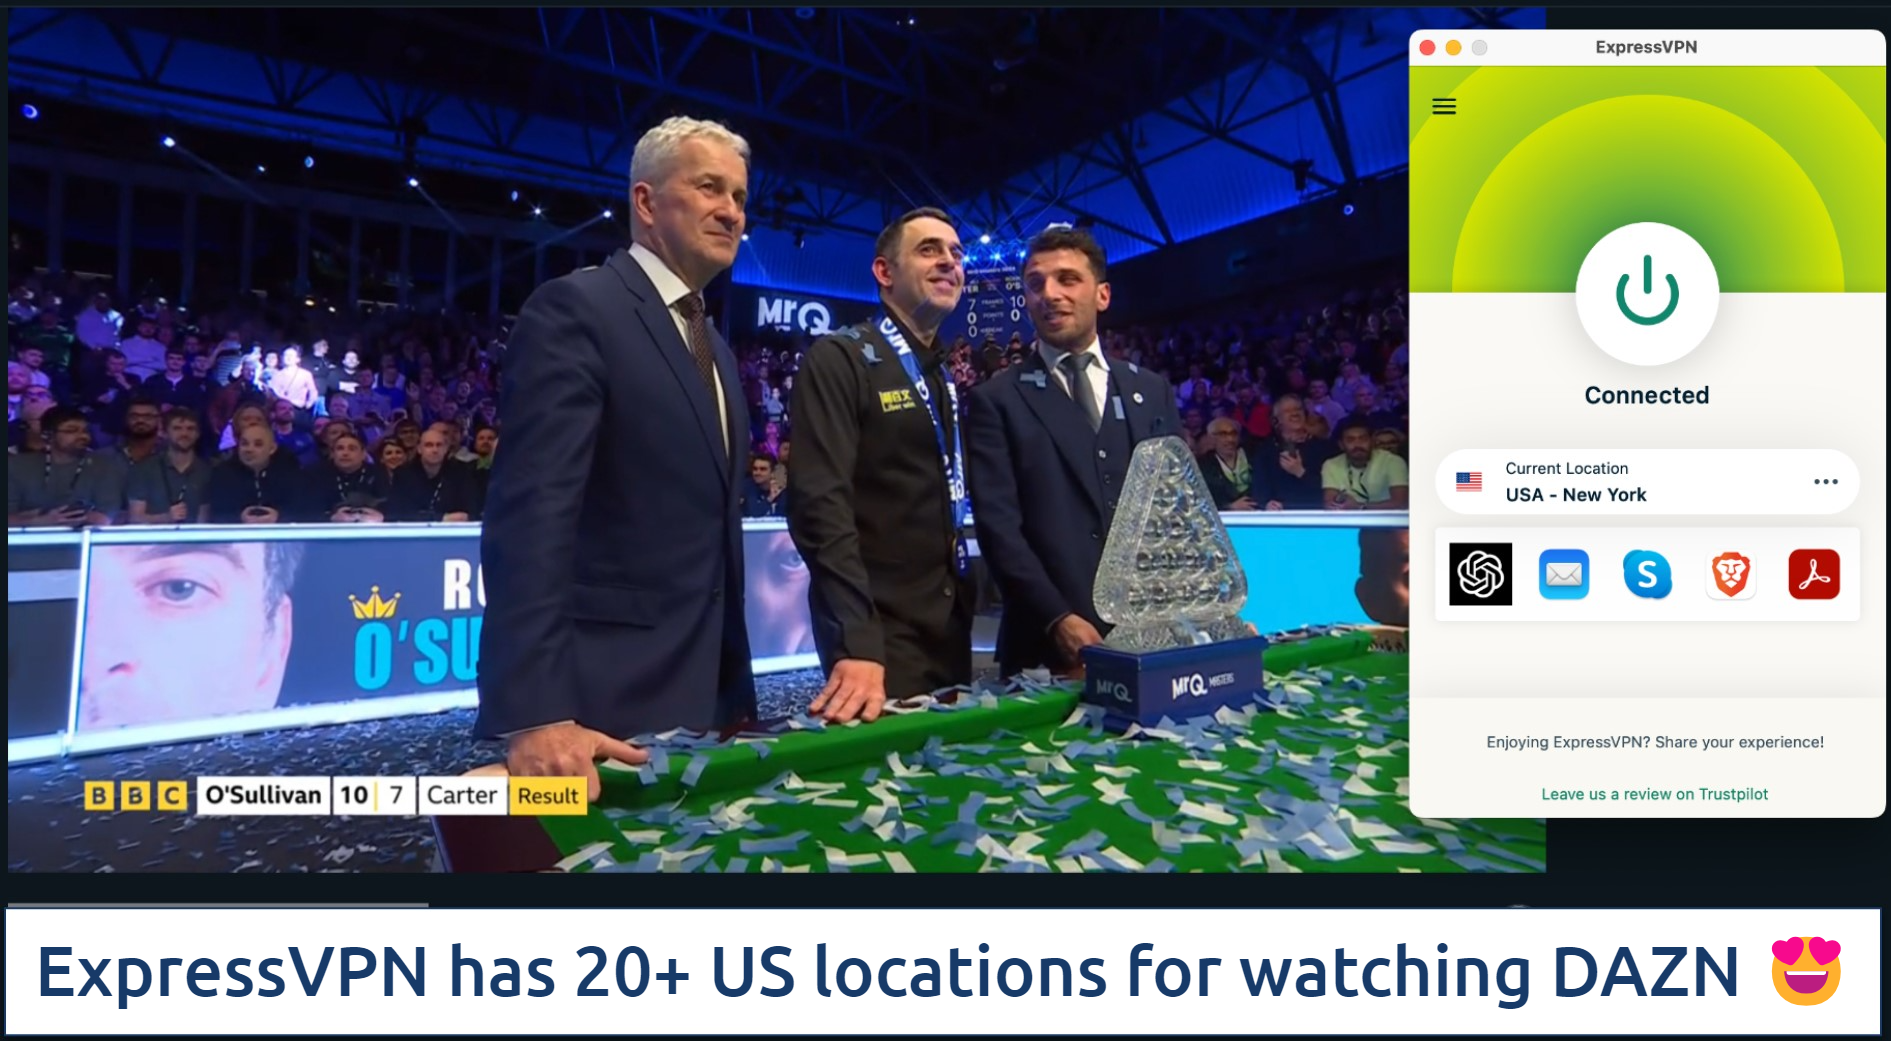 Screenshot of the ExpressVPN app connected to a US - New York server while streaming snooker on DAZN